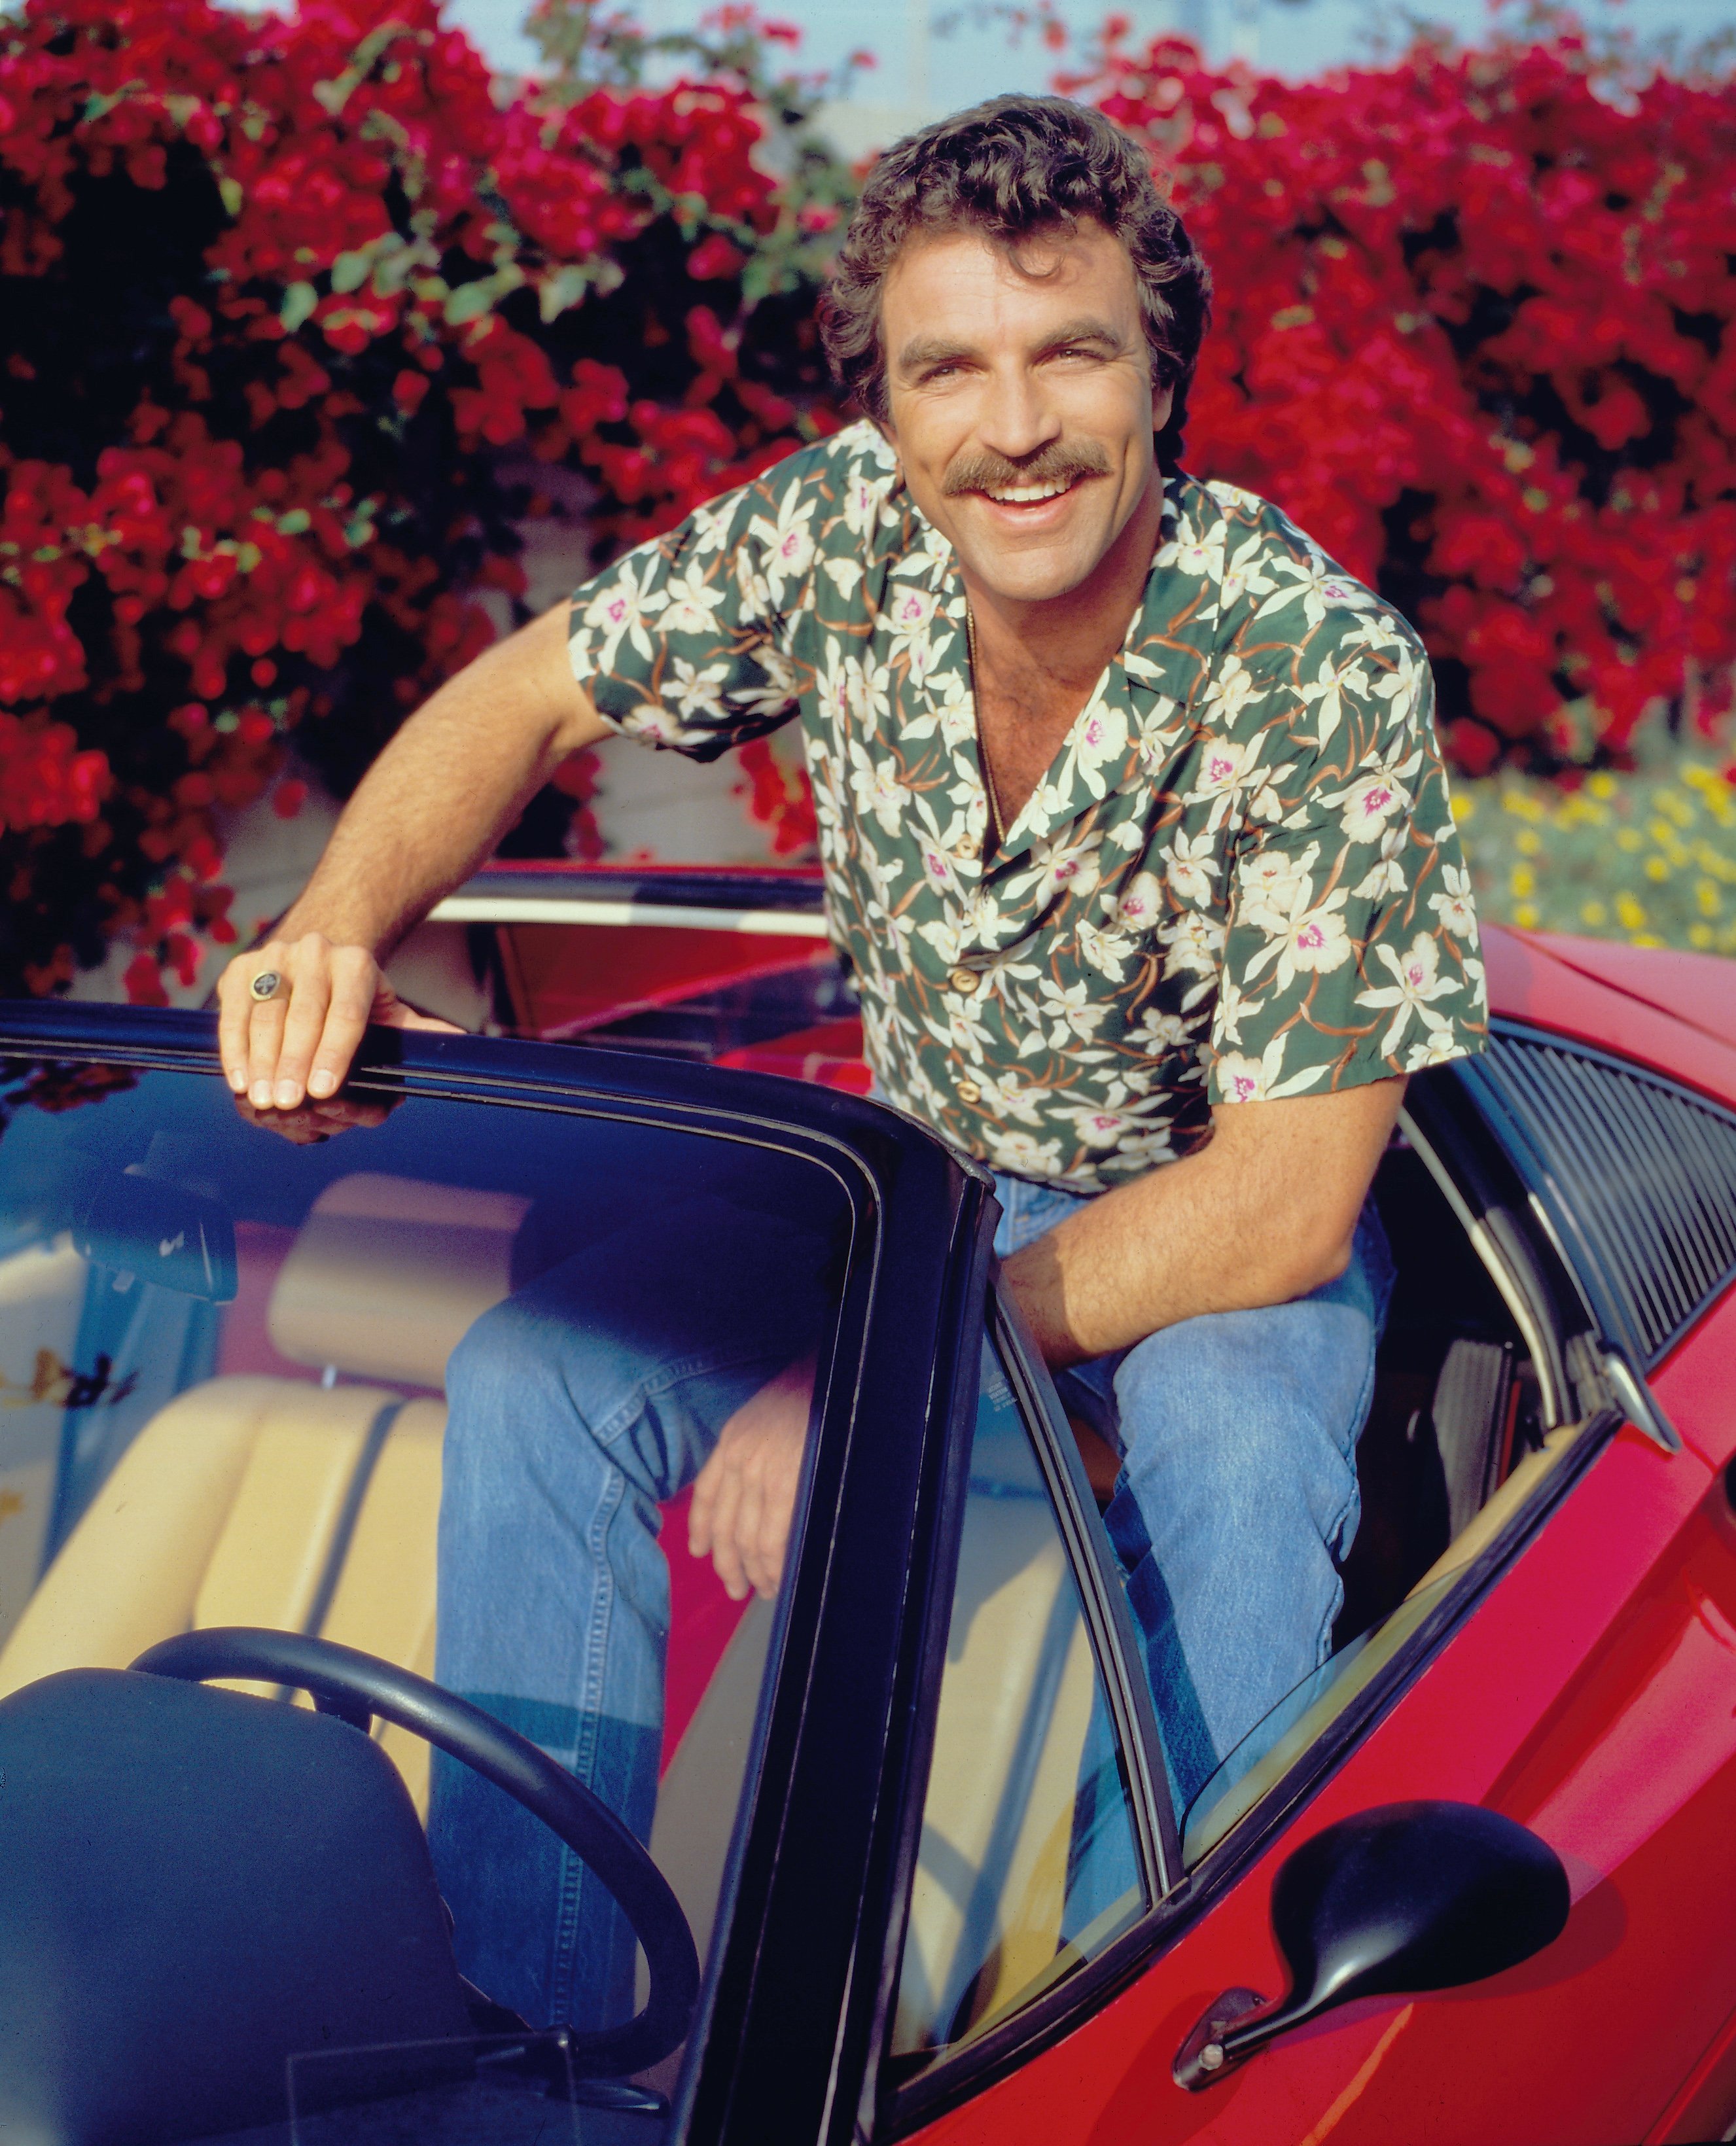 Tom Selleck pictured wearing a Hawaiian floral print shirt while sitting on a red Ferrari on January 1, 1984. | Photo: Getty Images